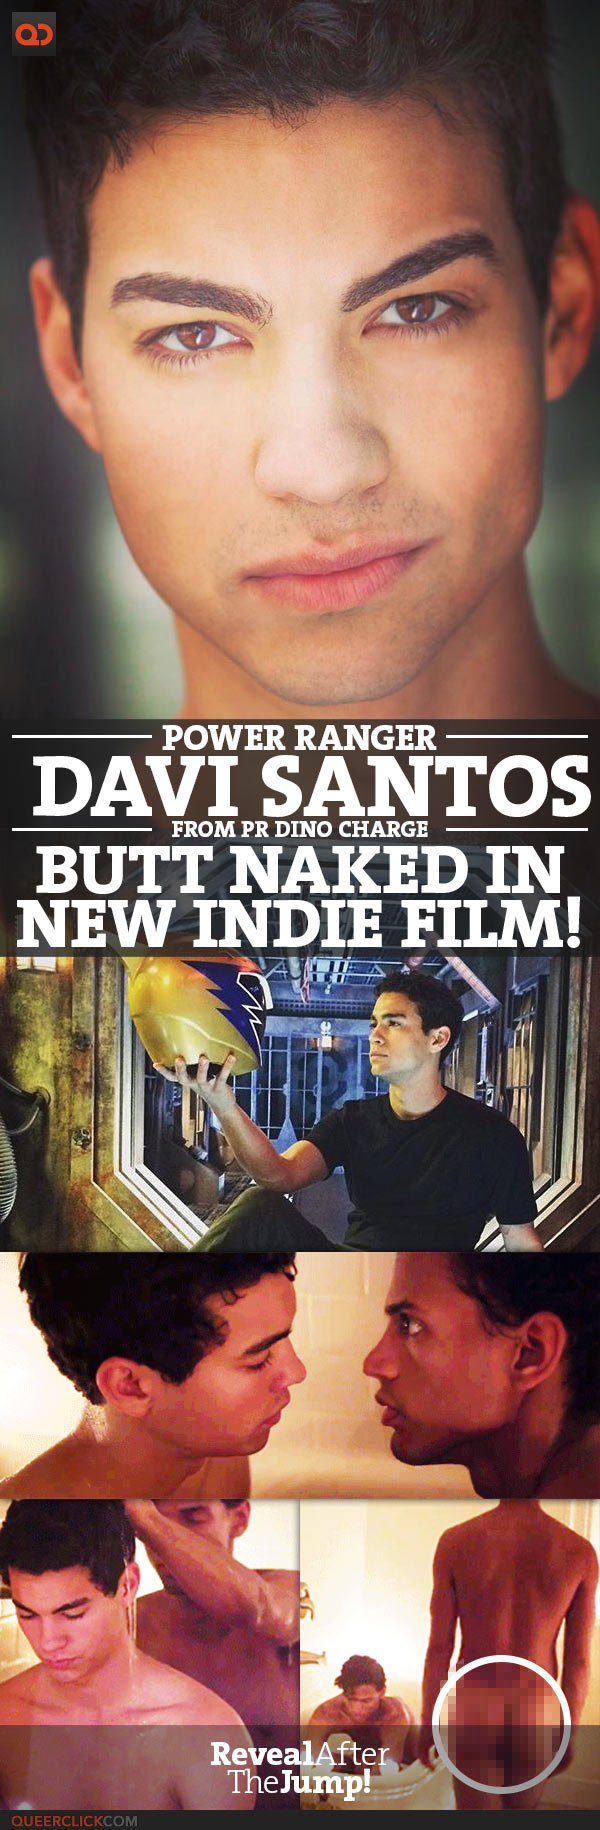 Power Ranger Actor Davi Santos From Dino Charge Butt Naked In New Indie Film